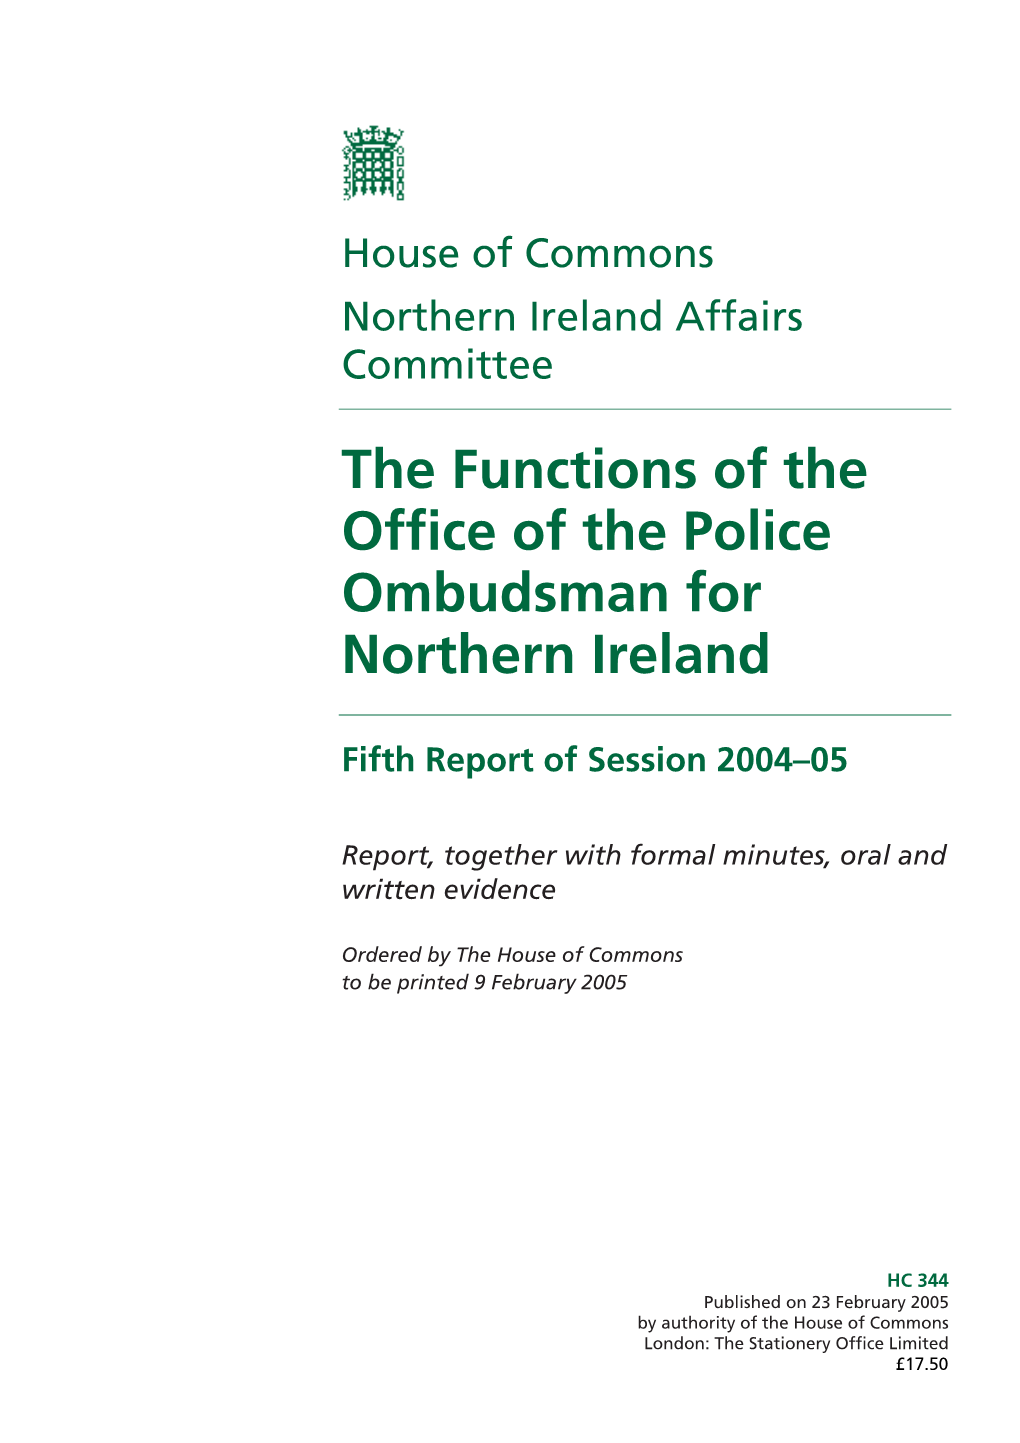 The Functions of the Office of the Police Ombudsman for Northern Ireland